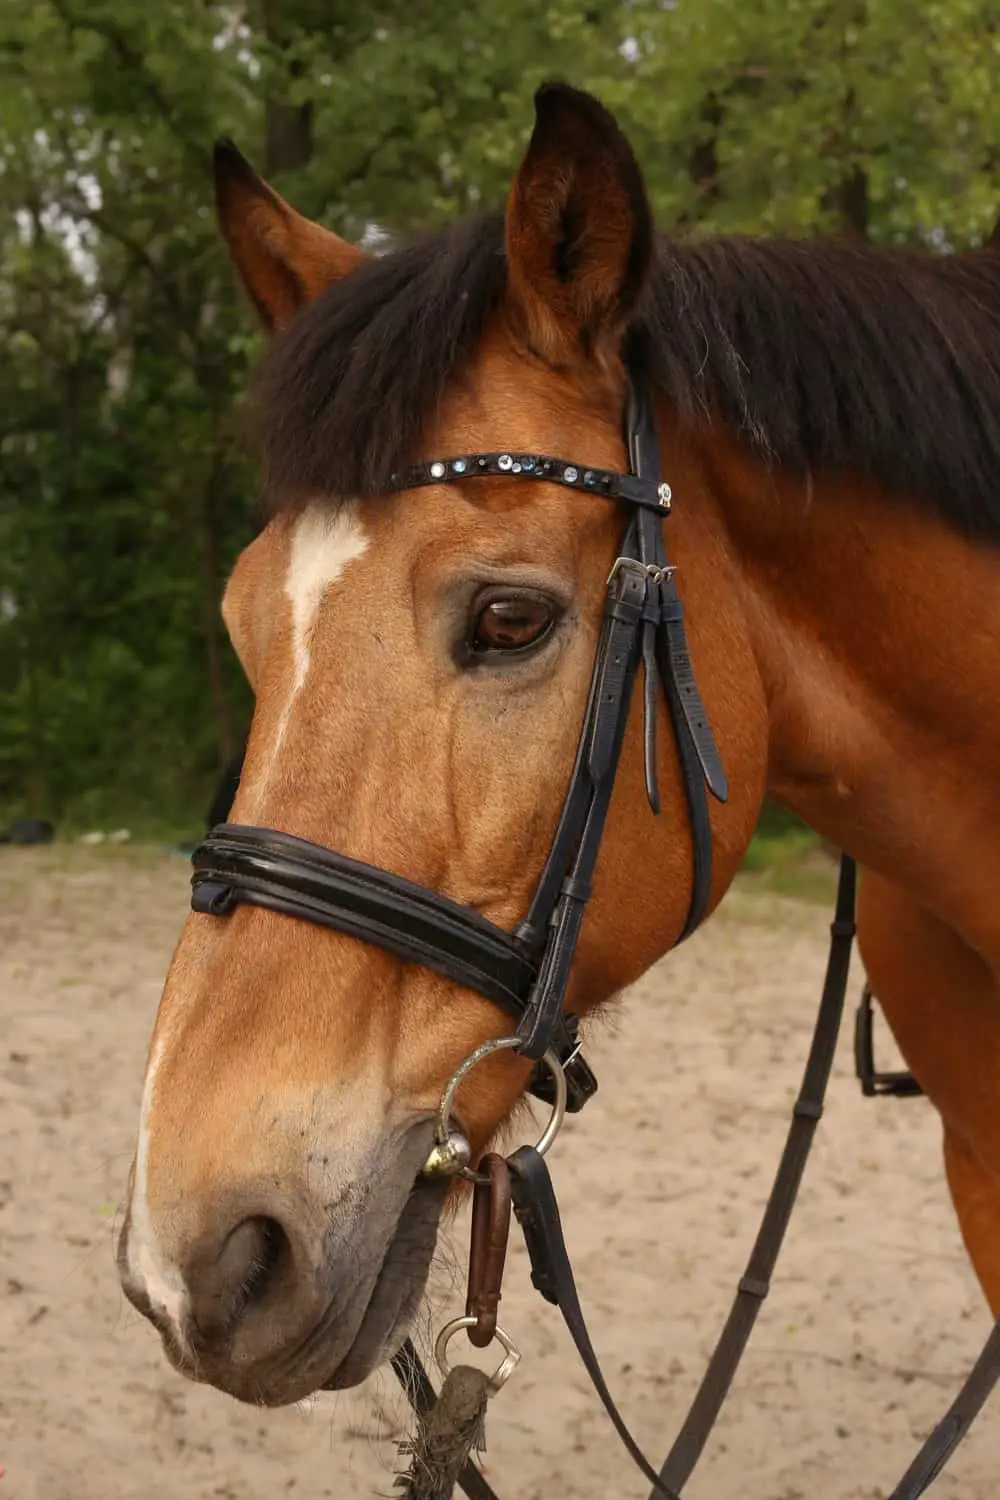 What Are Horse Blinders?